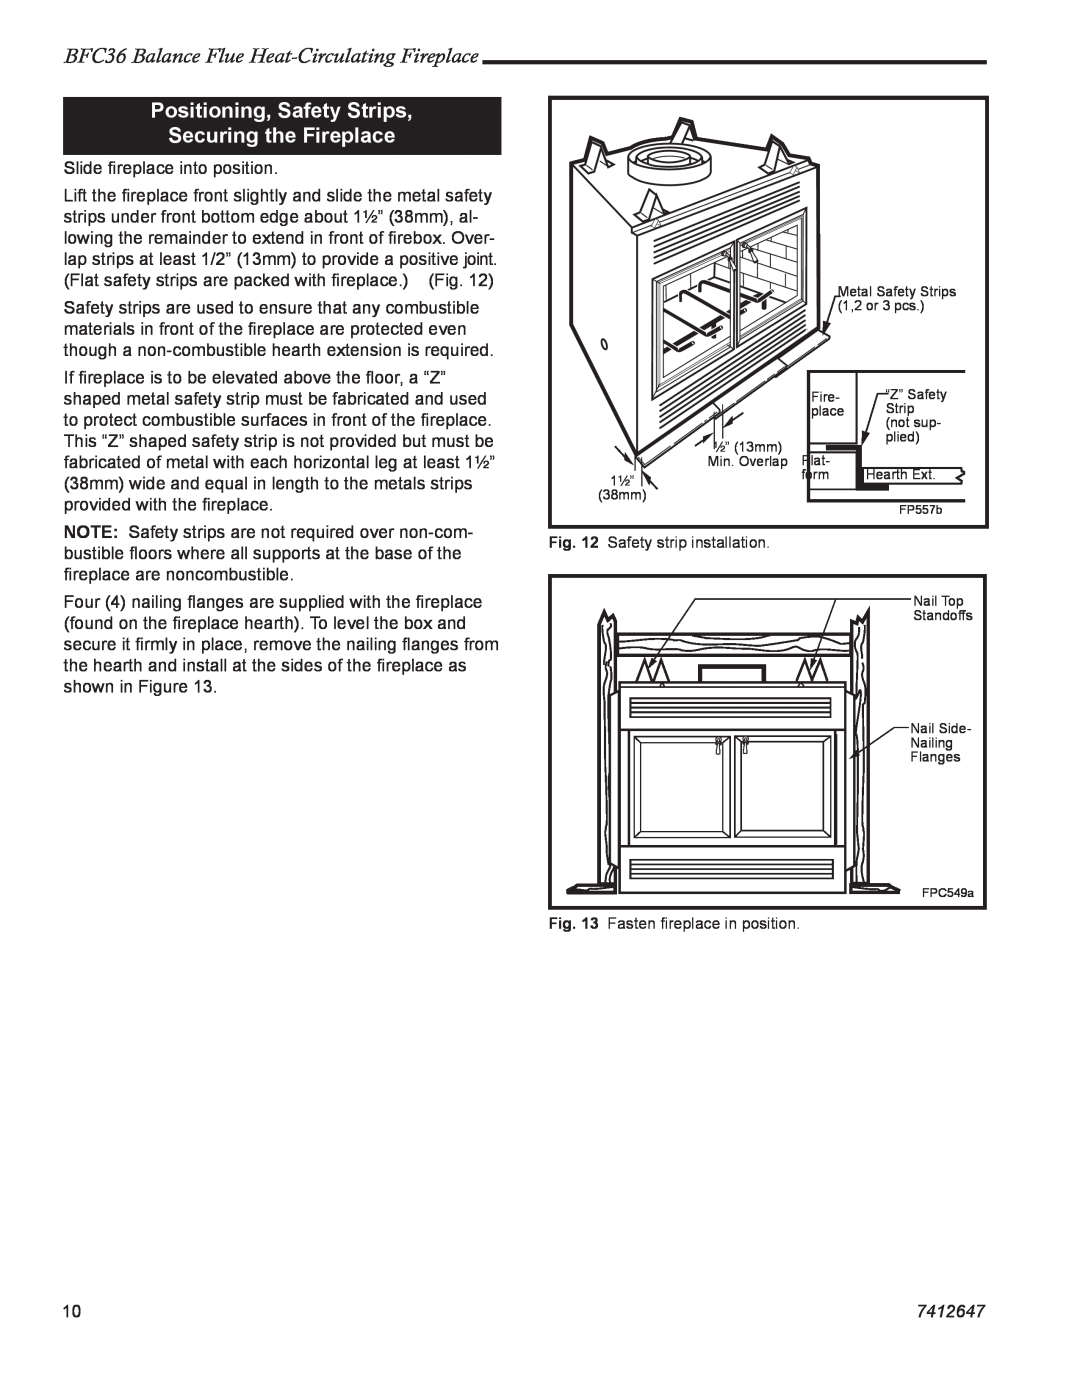 Vermont Casting manual Positioning, Safety Strips Securing the Fireplace, BFC36 Balance Flue Heat-CirculatingFireplace 